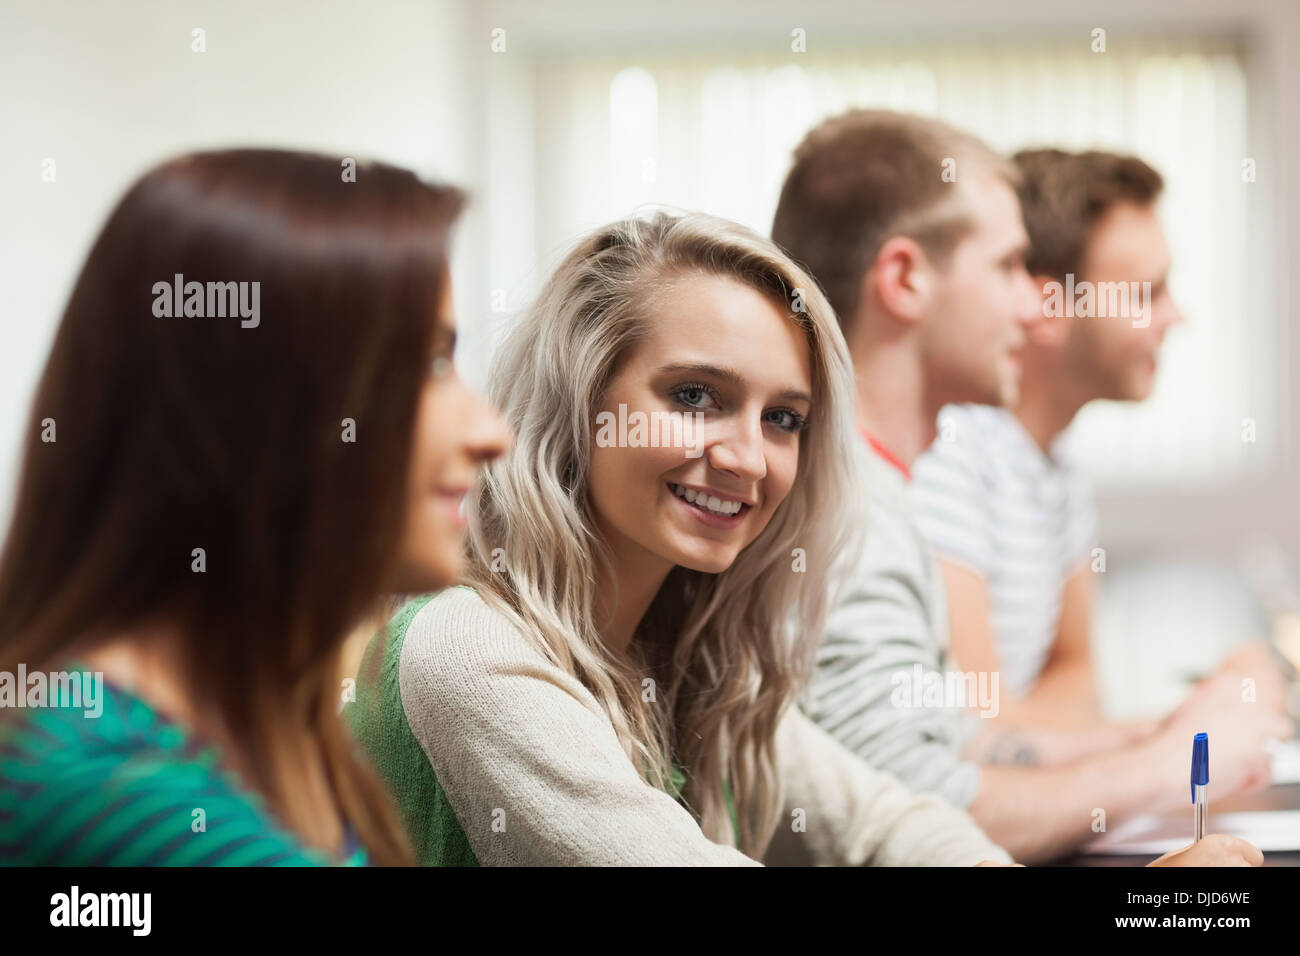 Blonde smiling student looking at camera Stock Photo